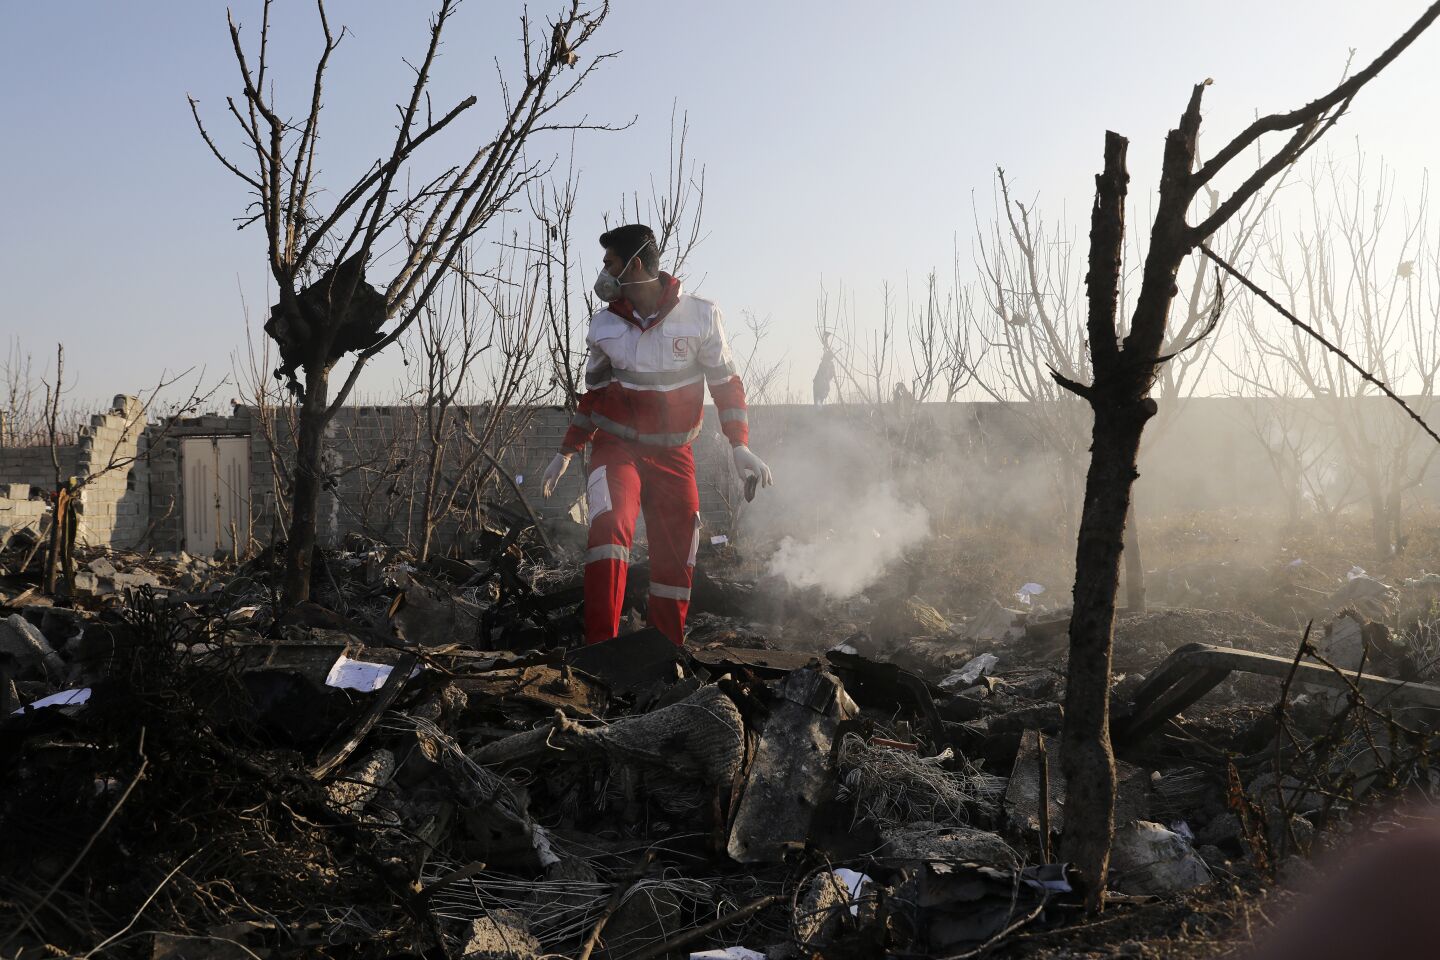 A rescue worker searches the scene of the plane crash. The aircraft never made it above 8,000 feet in the air, according to data from the flight-tracking website FlightRadar24.